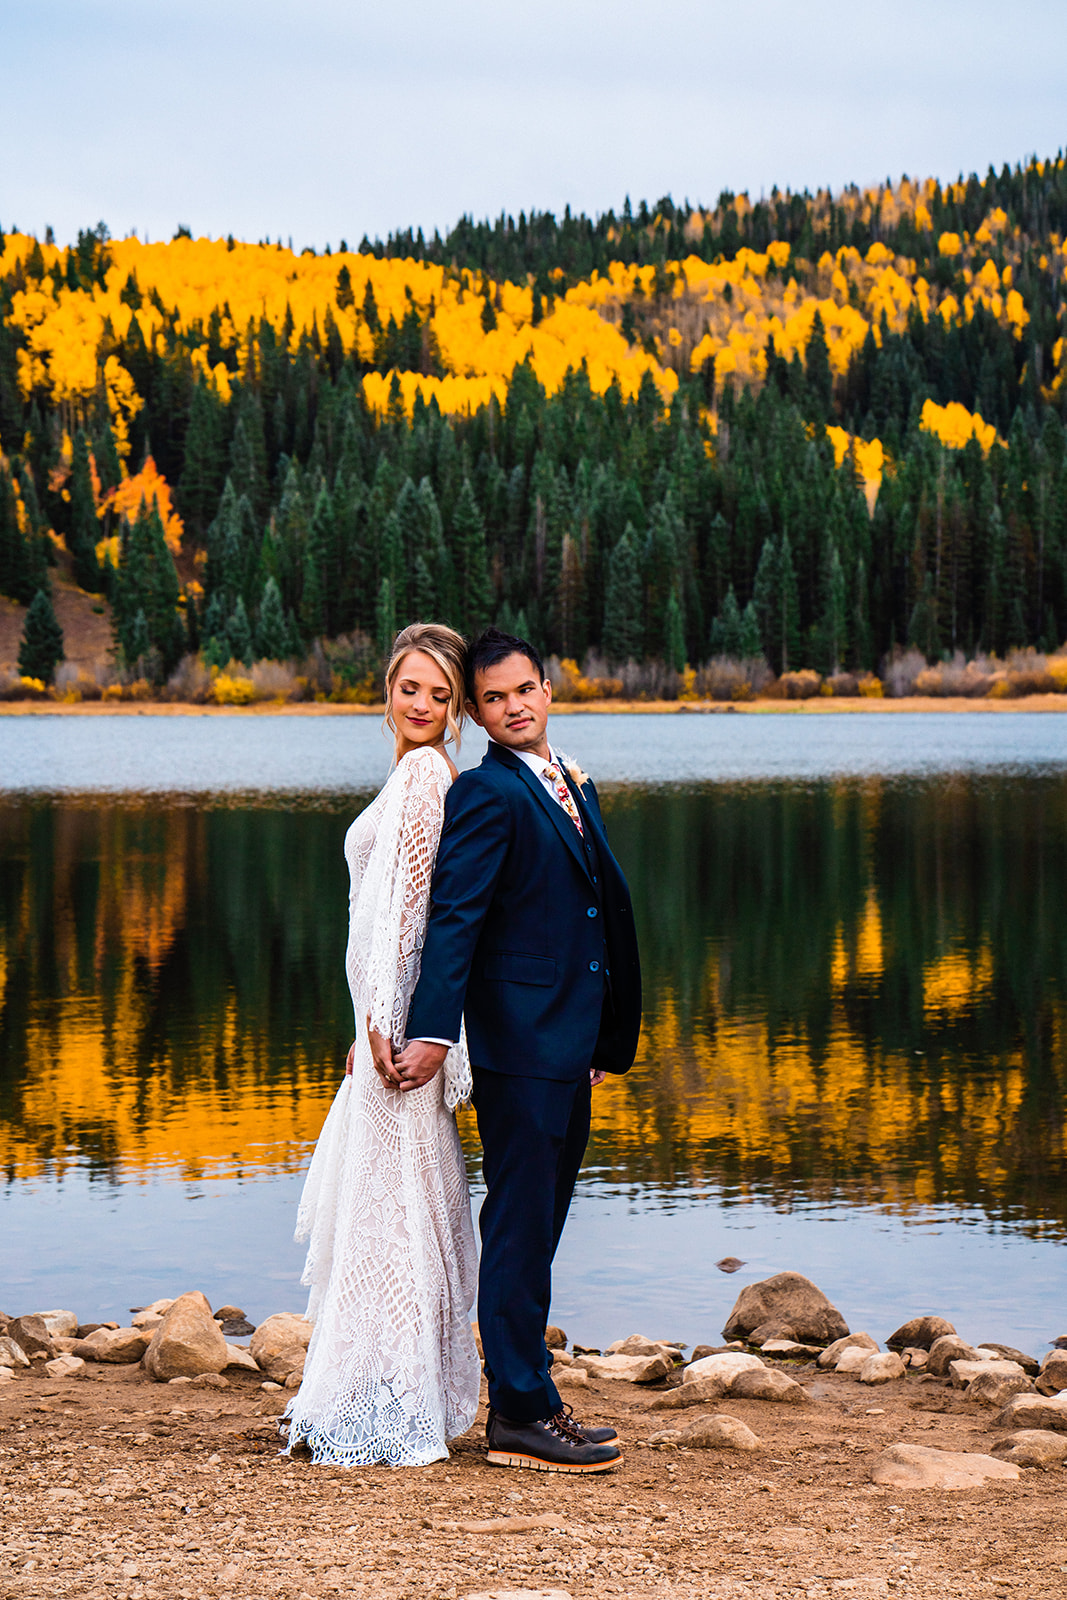 Adventurous Crested Butte Elopement in the mountains